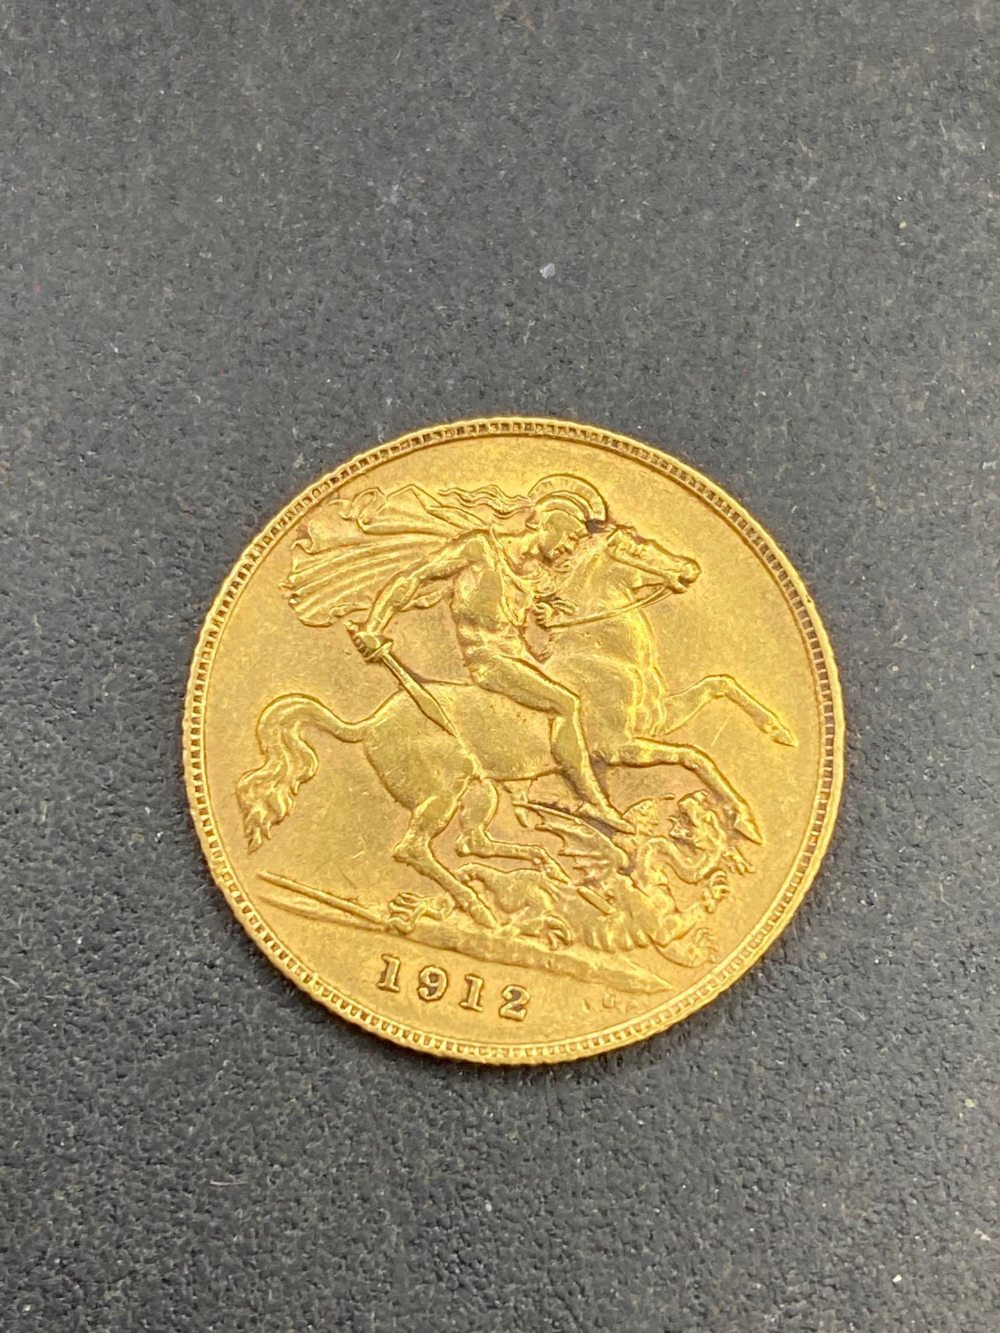 Half sovereign 1912 - Image 2 of 2